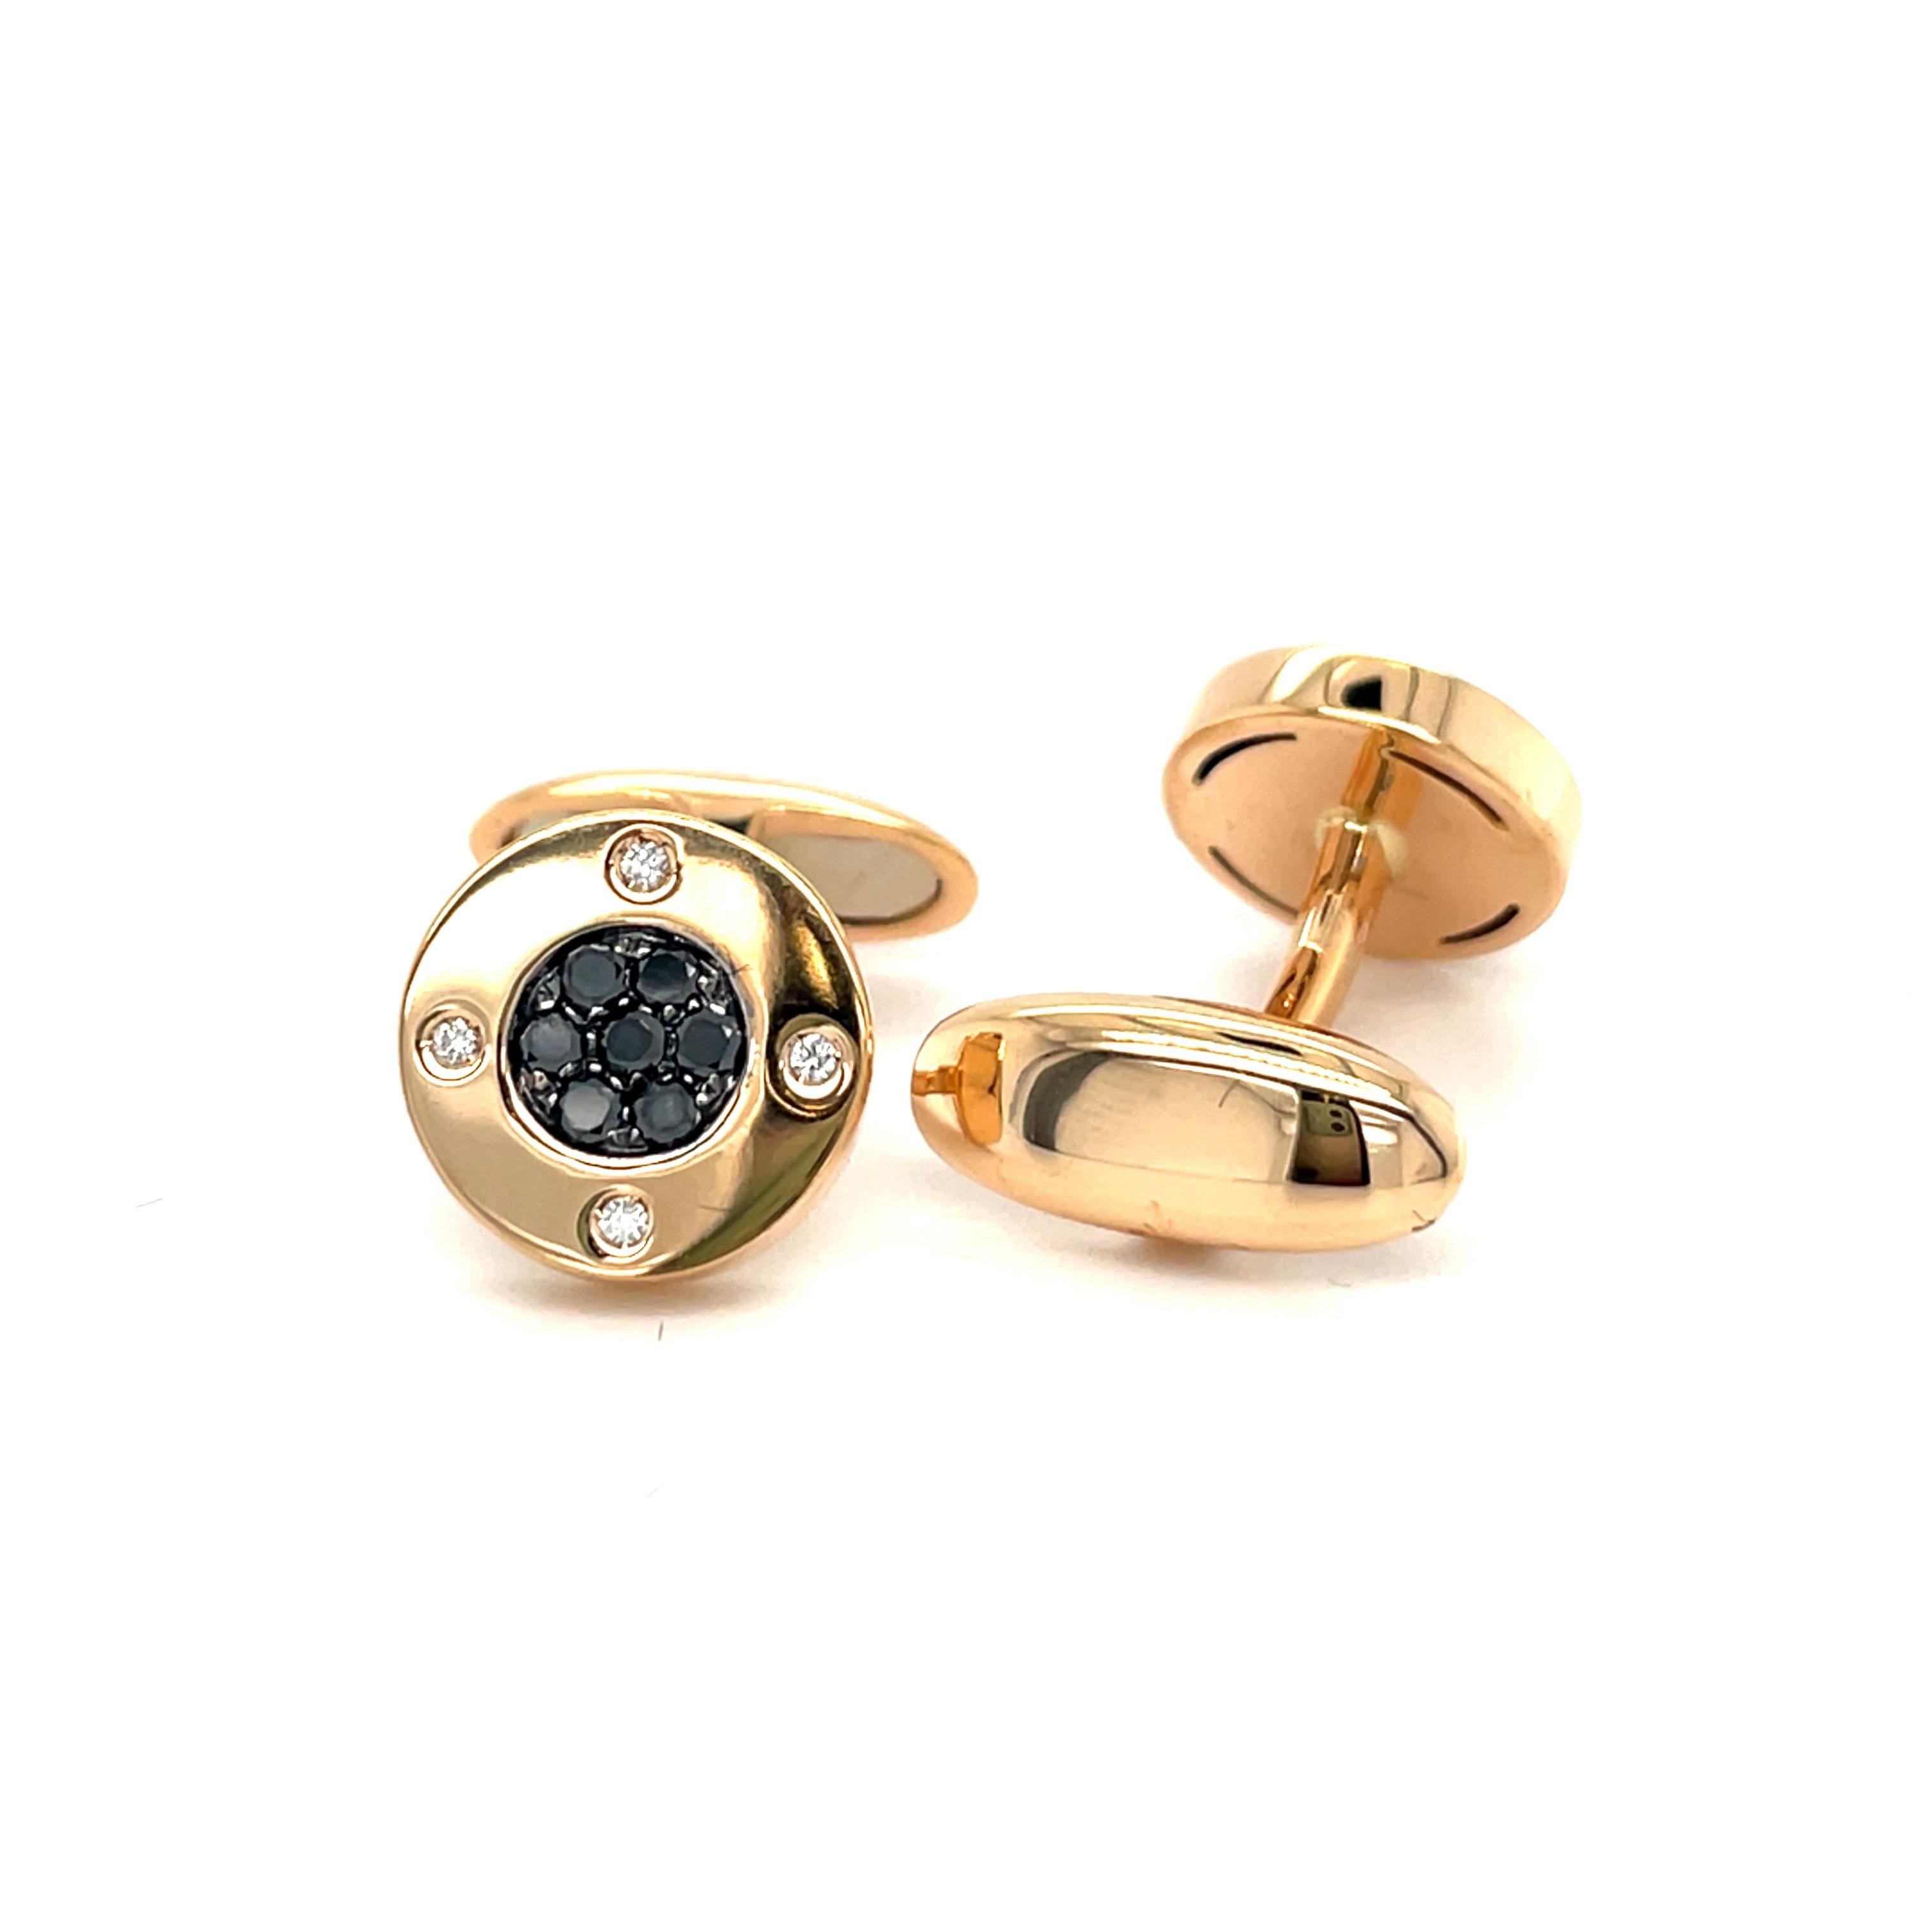 These yellow gold cufflinks are from Men's Collection. These cufflinks are decorated with black diamonds Diamonds and diamonds G color VS2 clarity 0.31. The dimensions of the cufflinks are 1.2cm. These cufflinks are a perfect upgrade to every